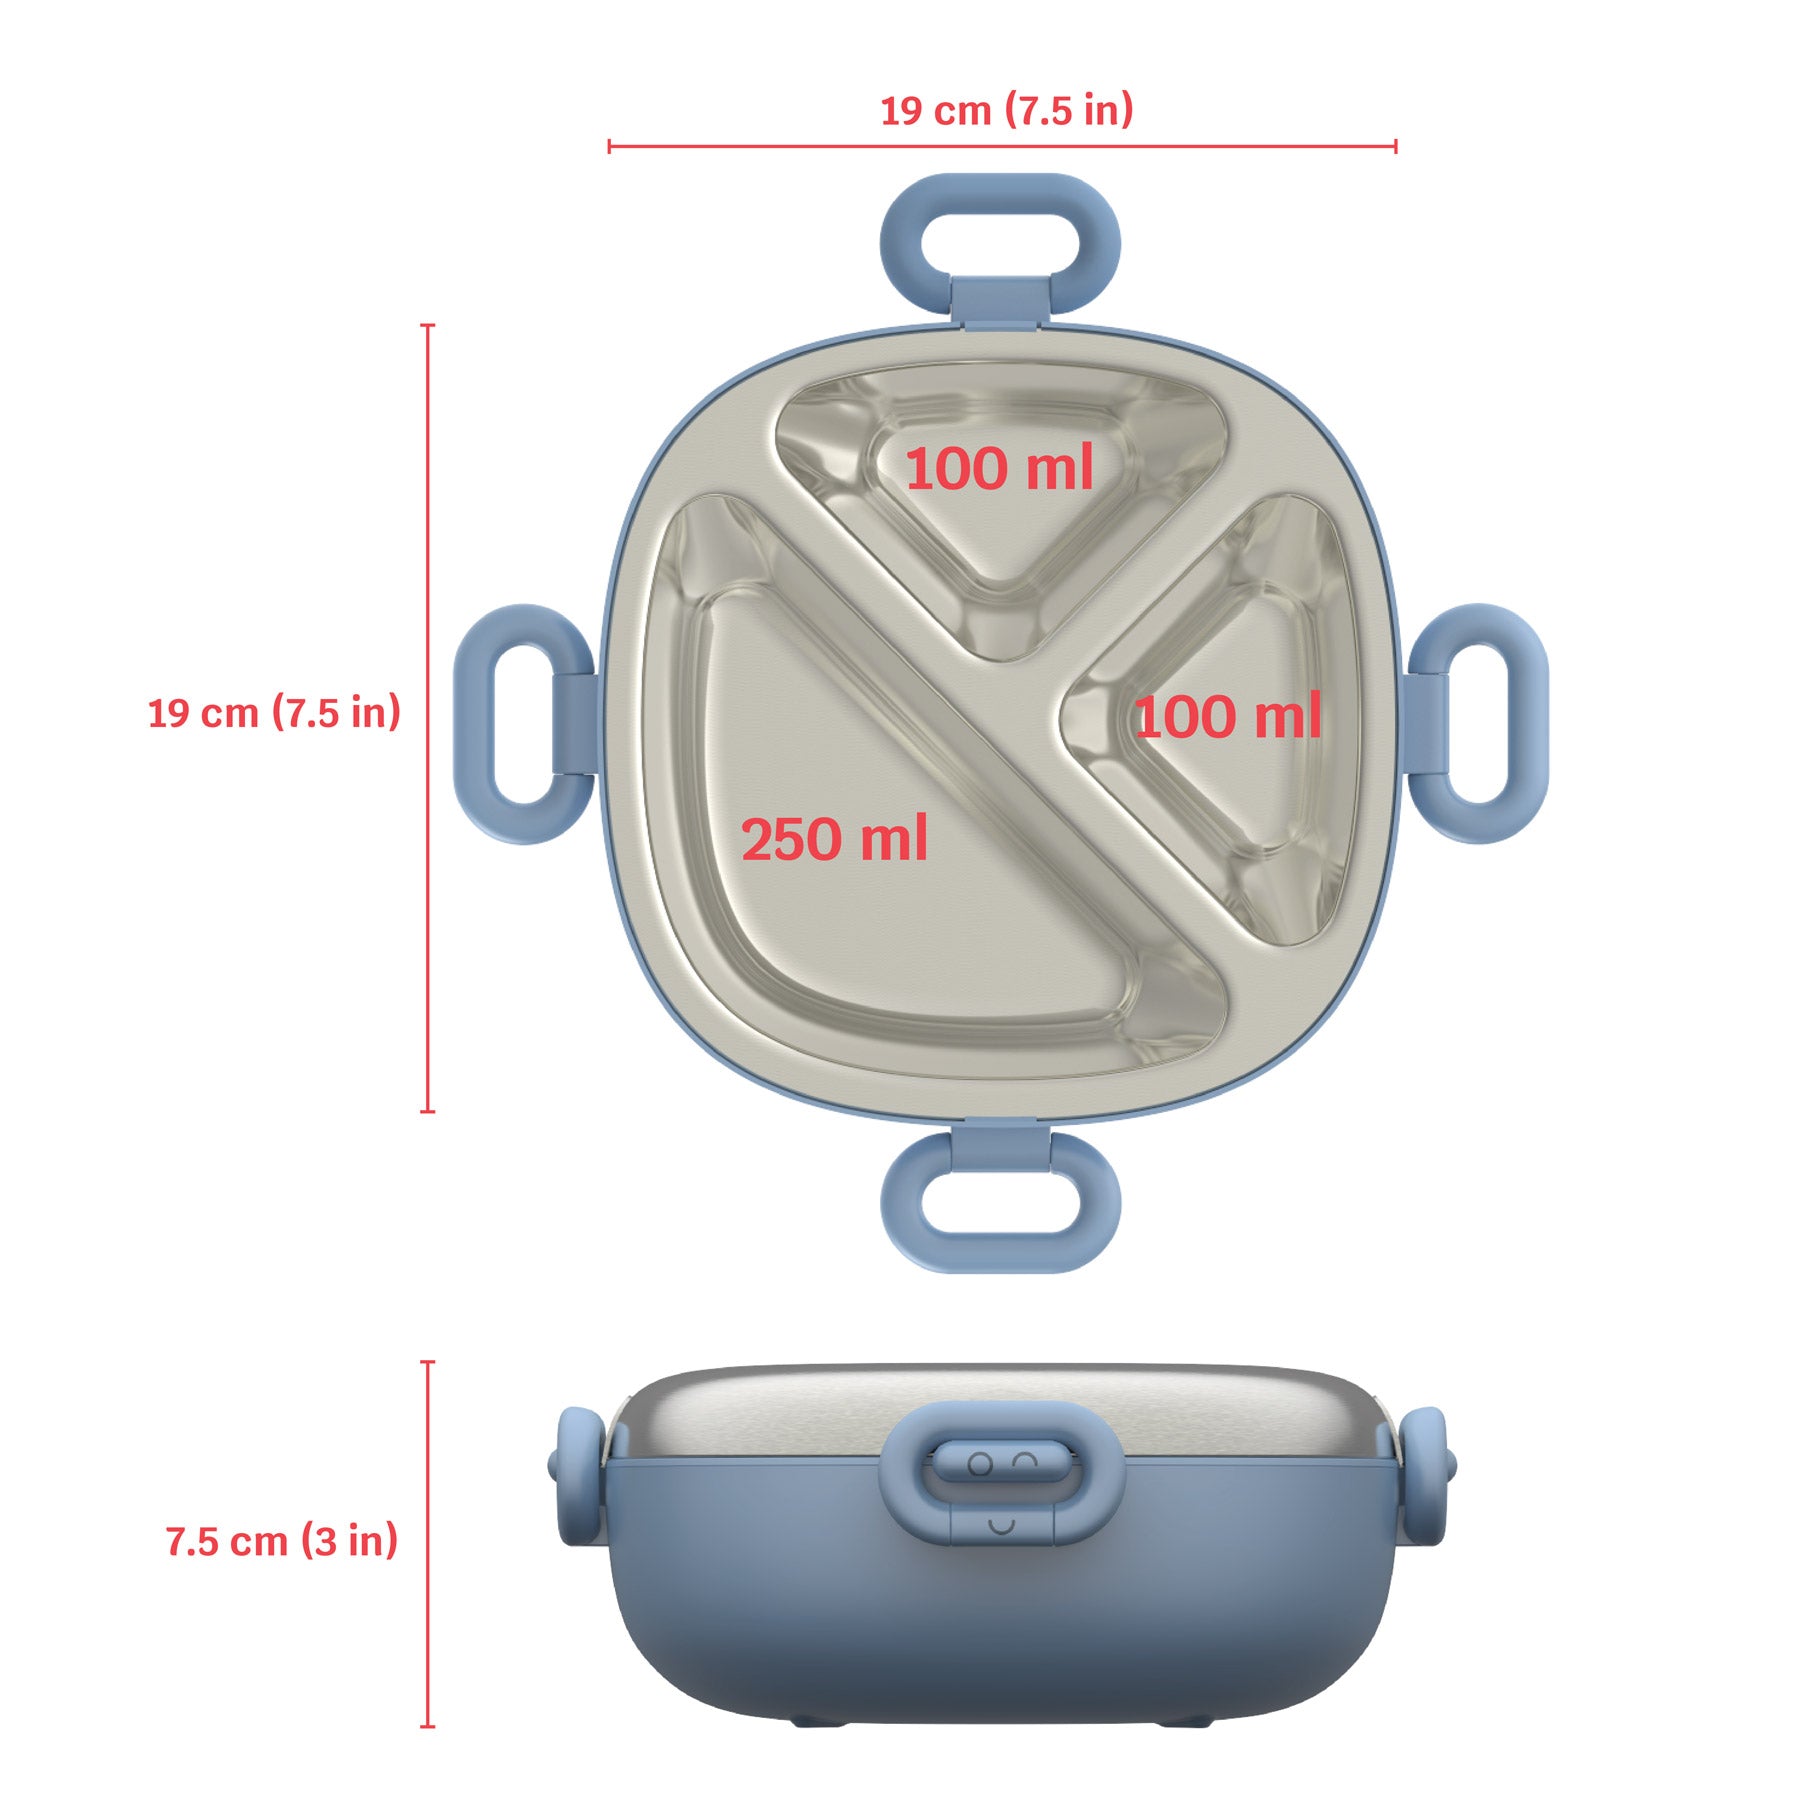 Dimensional view of Winck stainless steel bento box, measuring 19 cm in width and length with a depth of 7.5 cm, featuring compartments with capacities of 100 ml each and a larger 250 ml section, ideal for kids age 3-7.